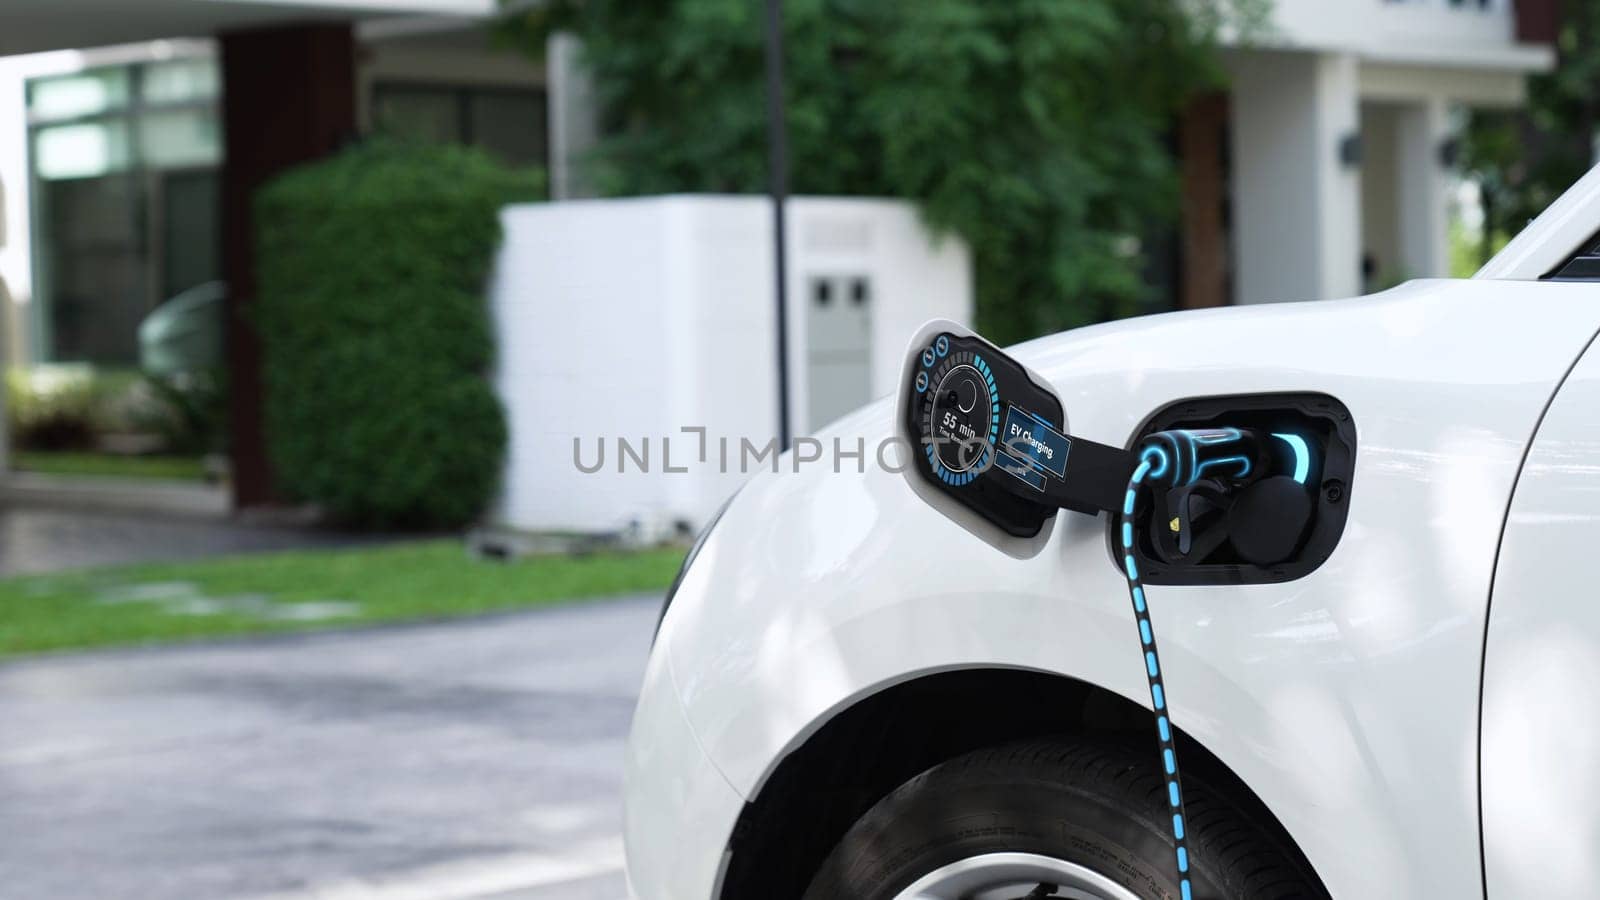 Electric car plugged in with home charging station. Peruse by biancoblue